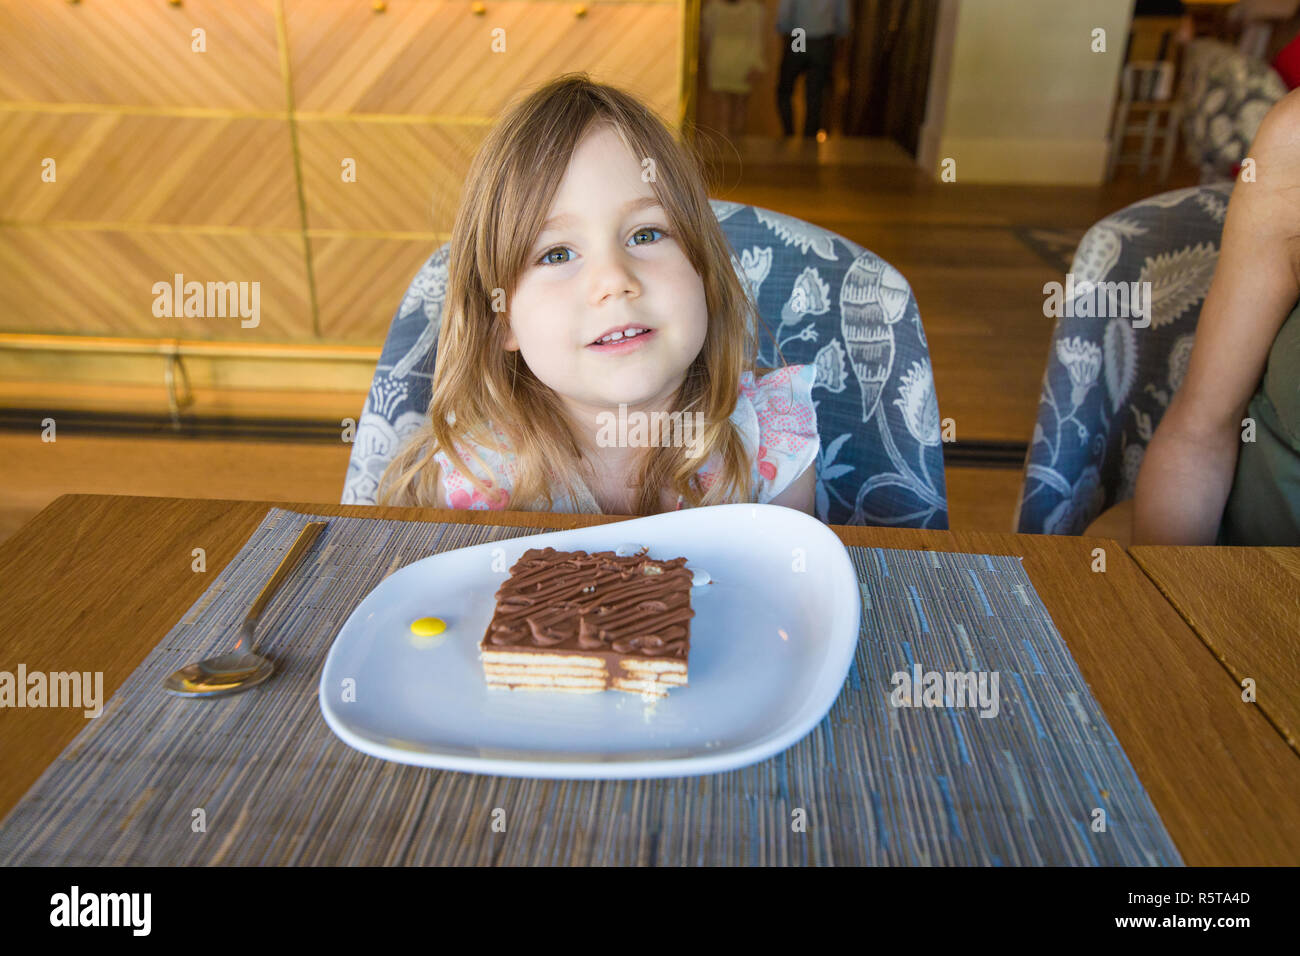 three years old child looking with a portion of chocolate cake in white dish over placemat sitting next to woman in restaurant Stock Photo